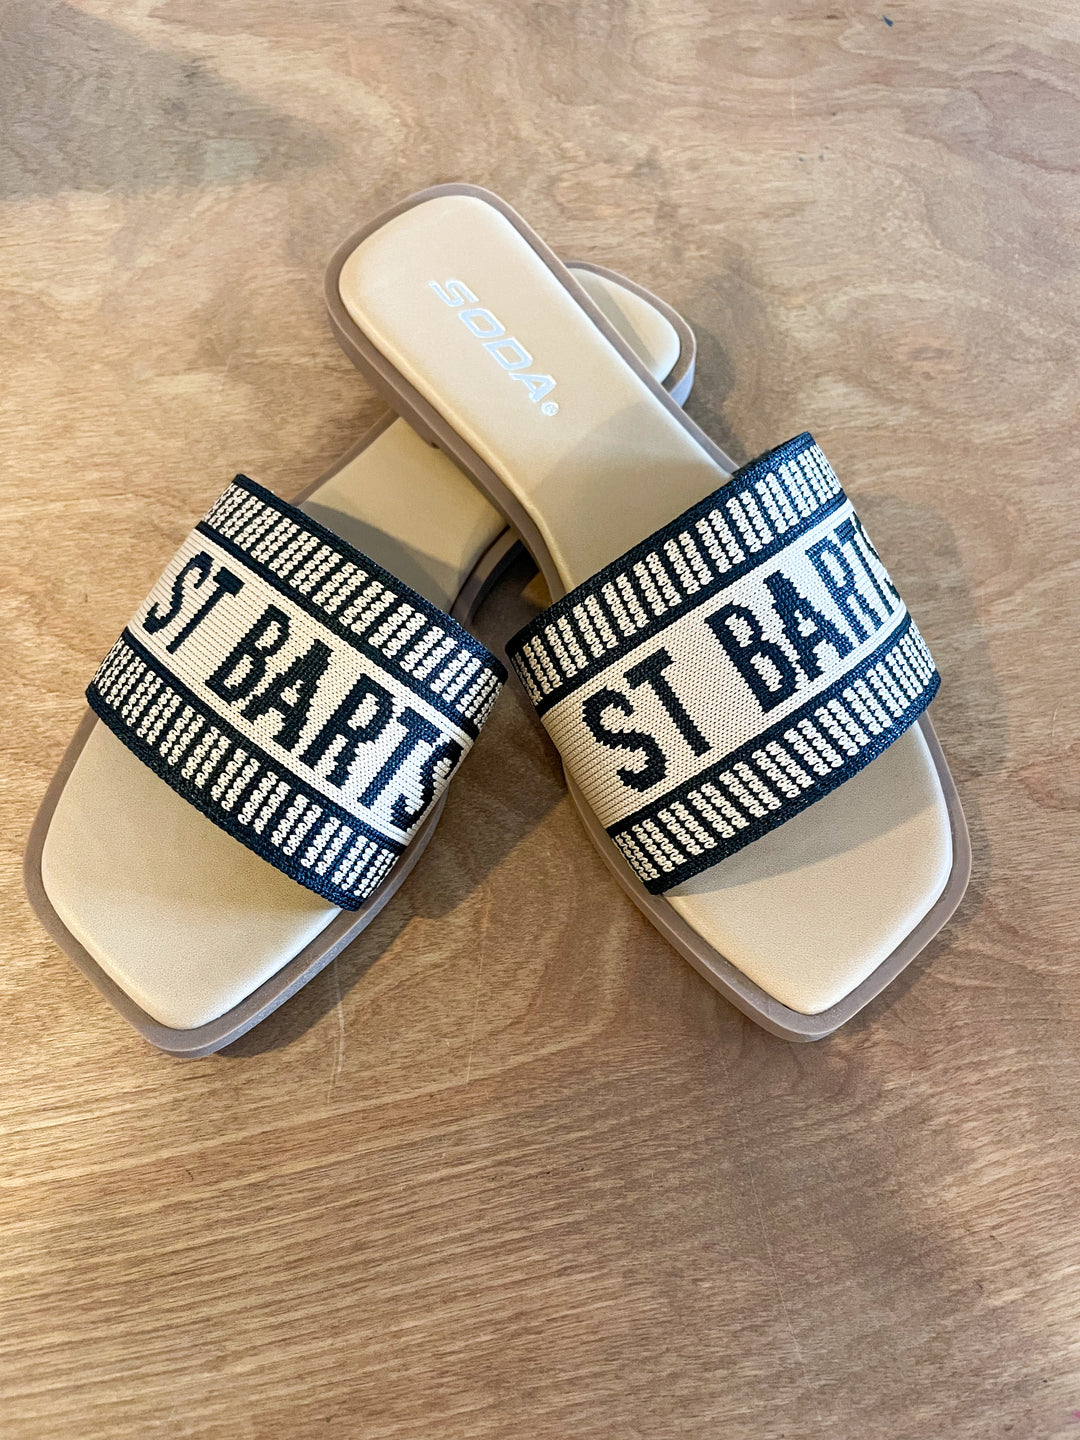 The St. Barts Sandals